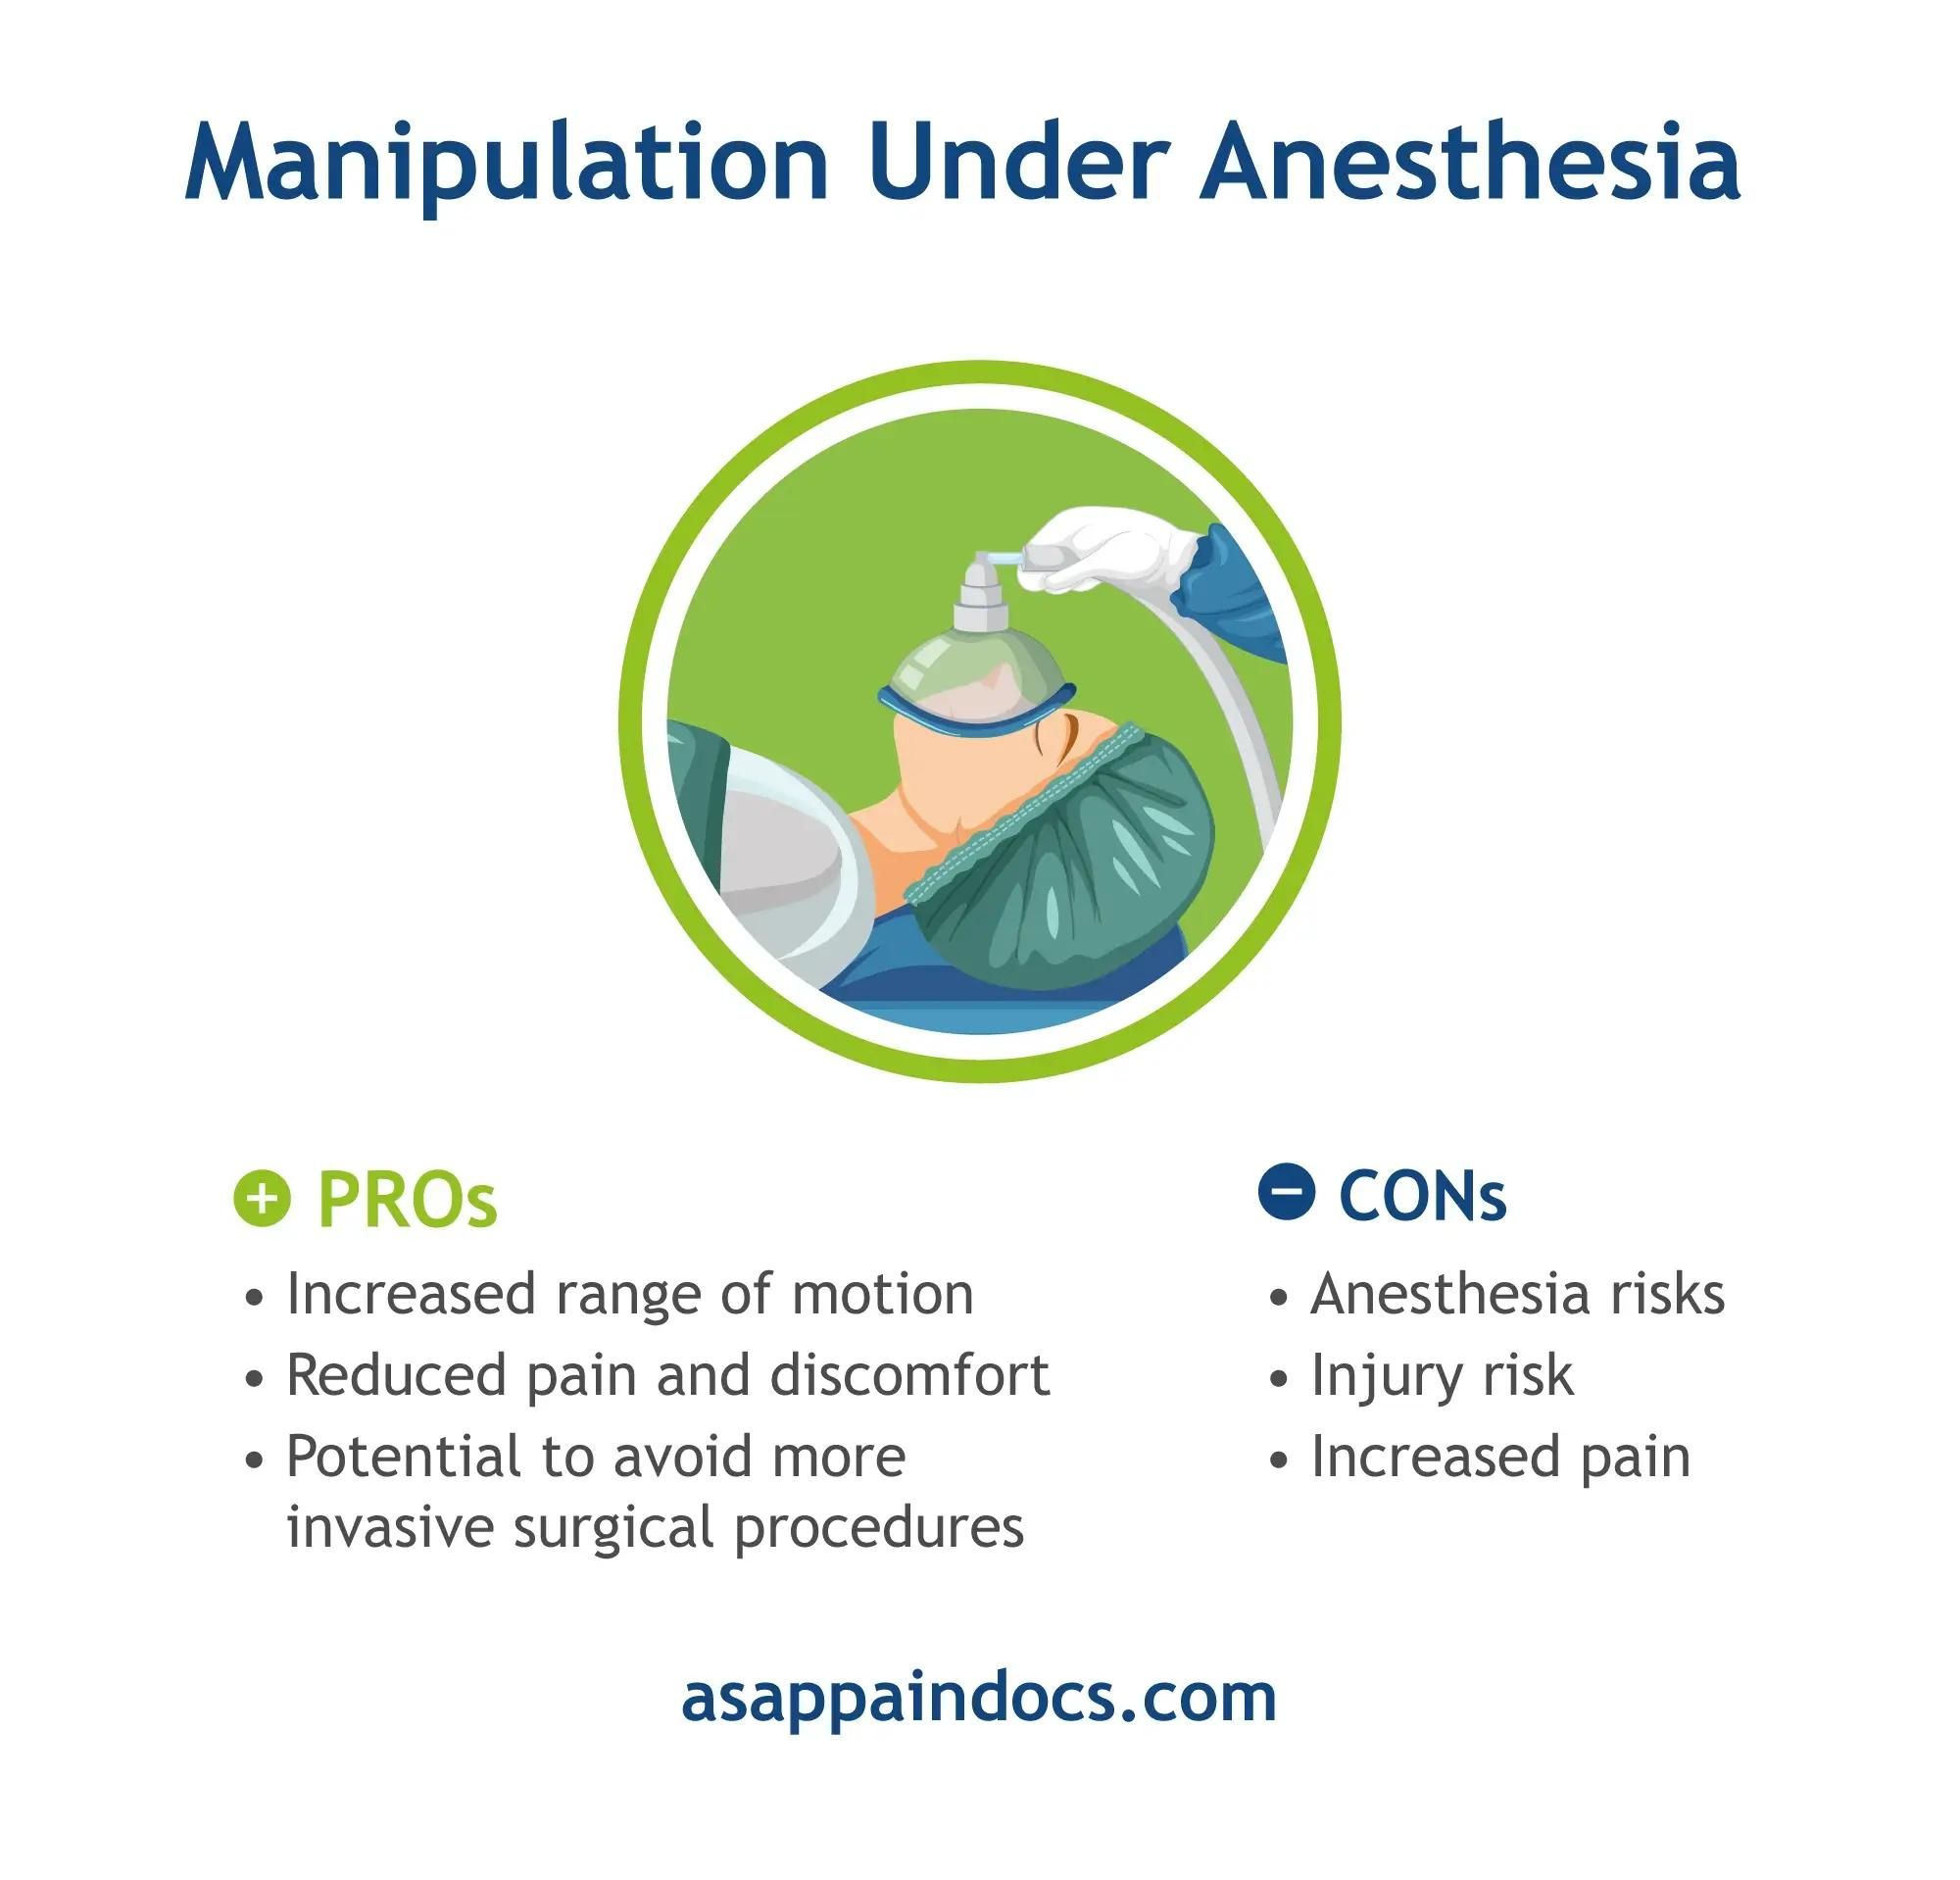 The manipulation under anesthesia process